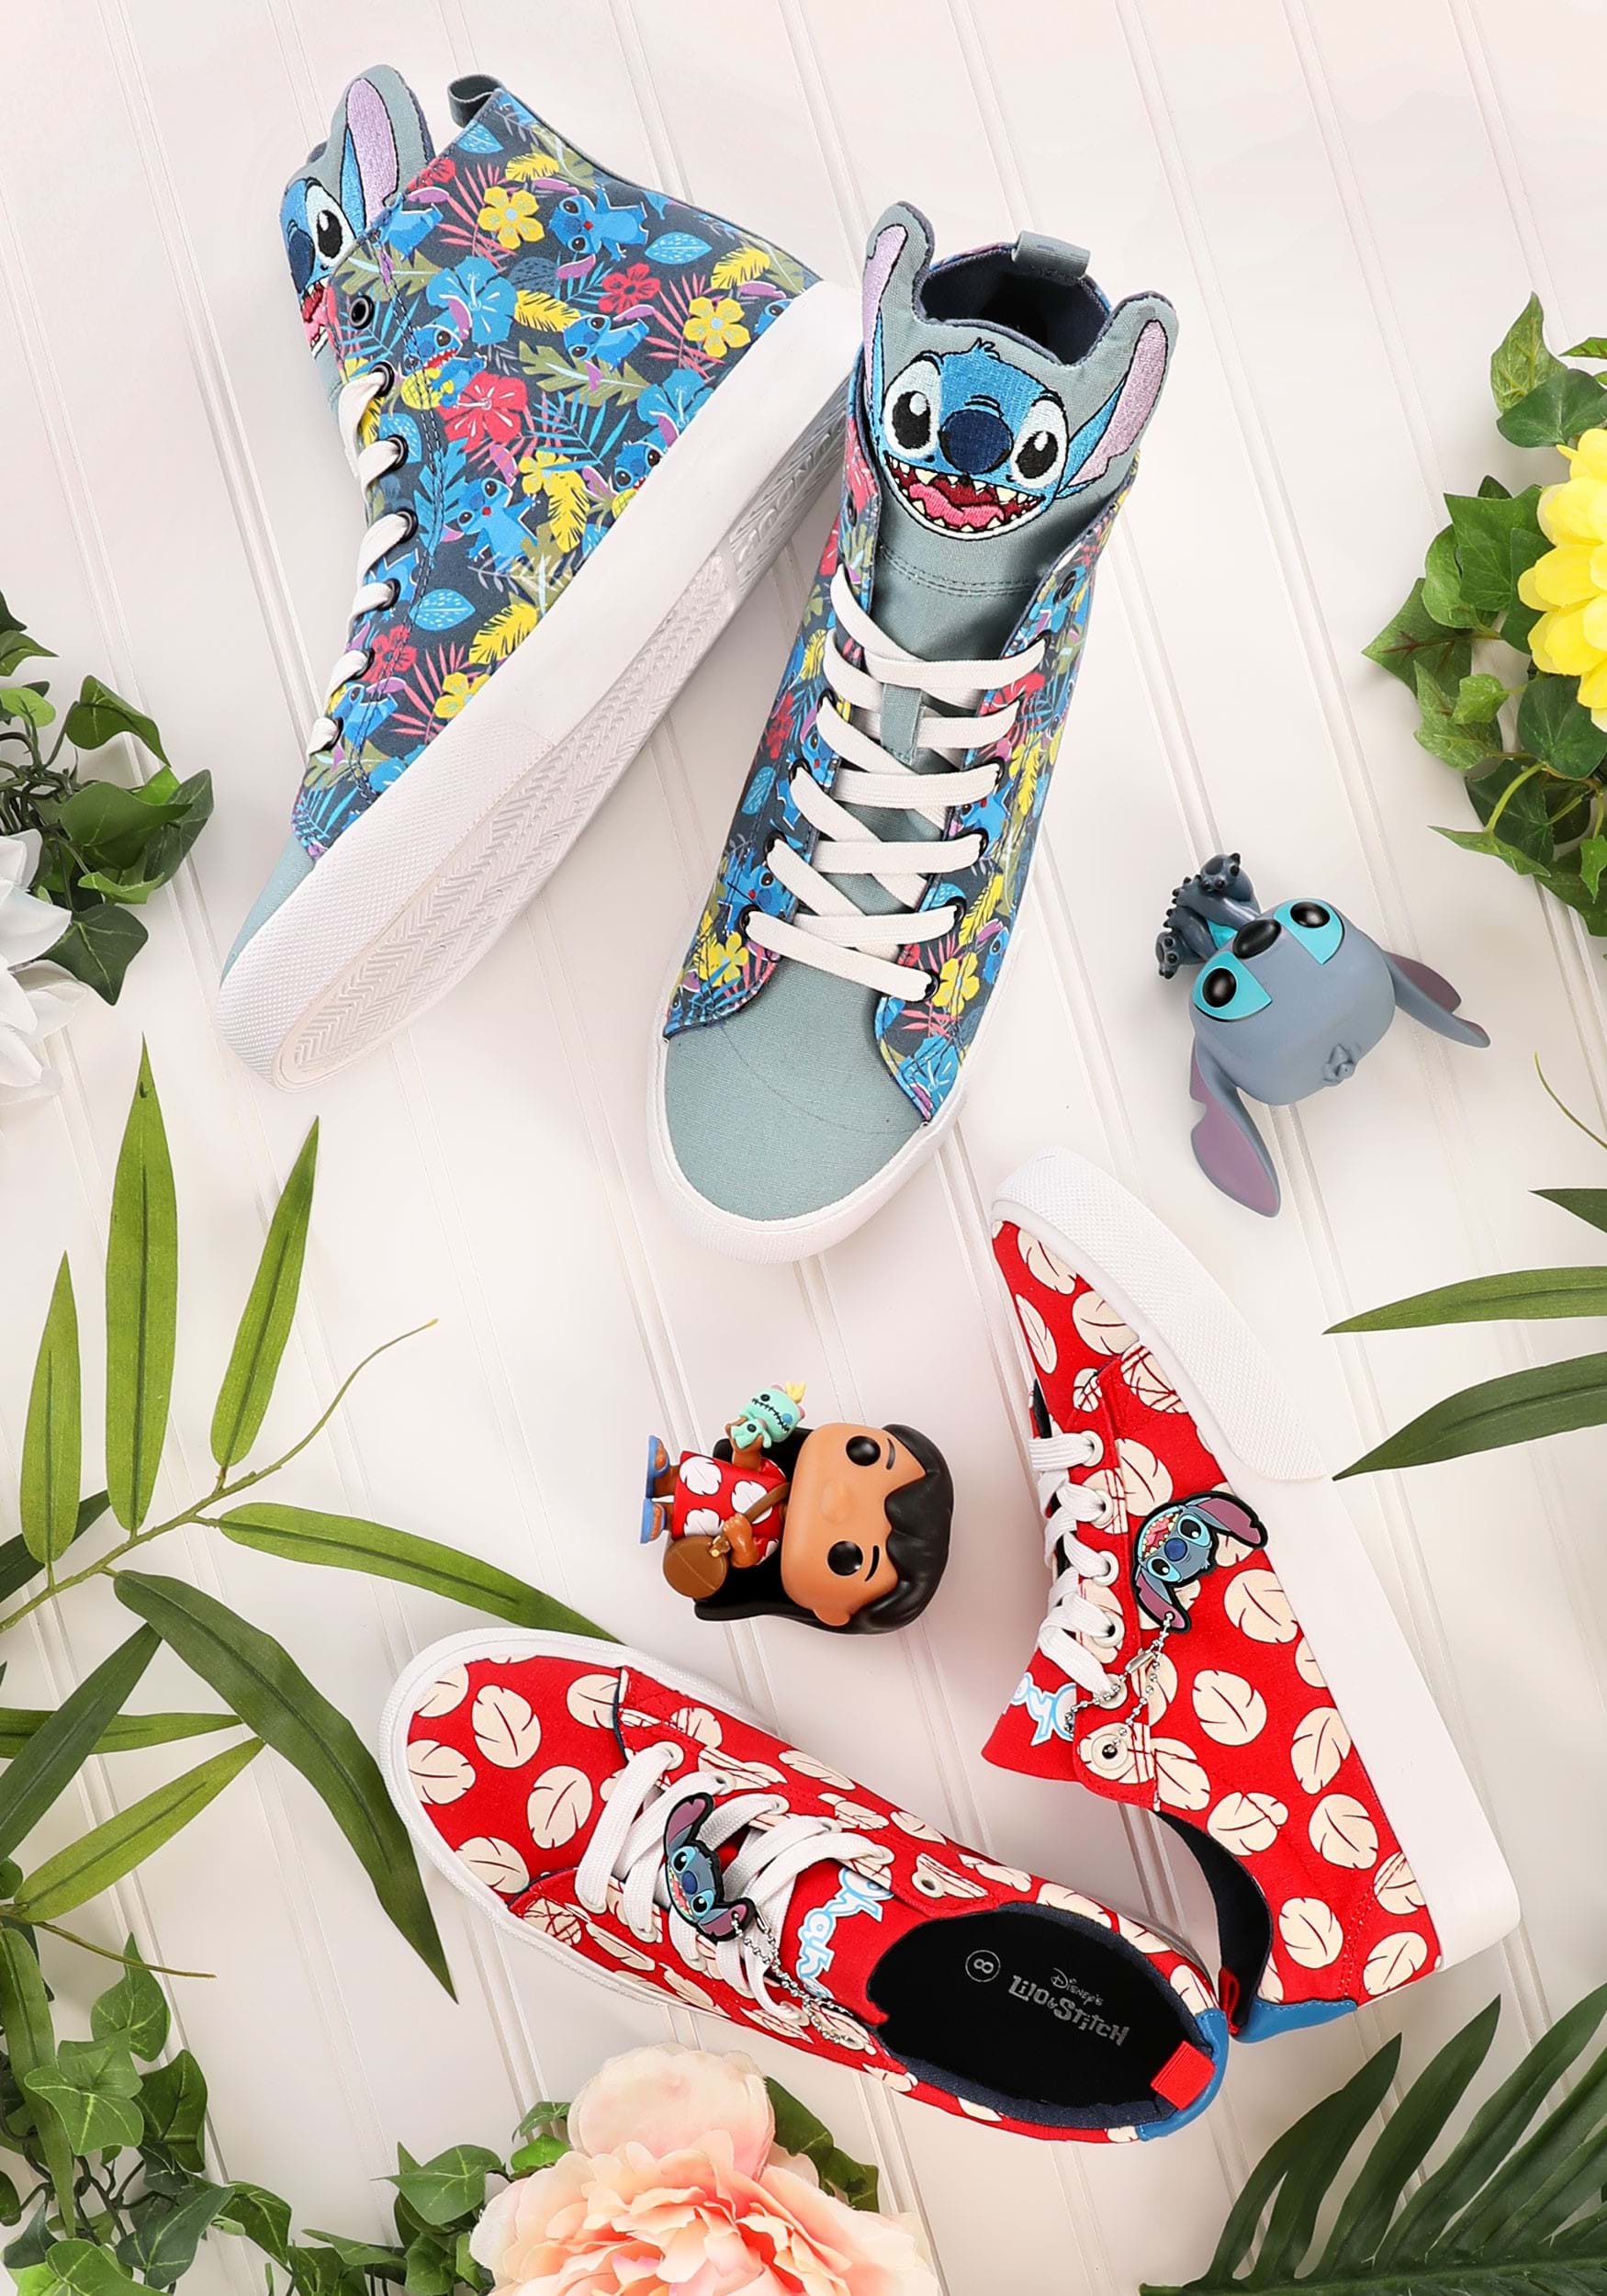 Unisex Lilo & Stitch High Top Sneakers